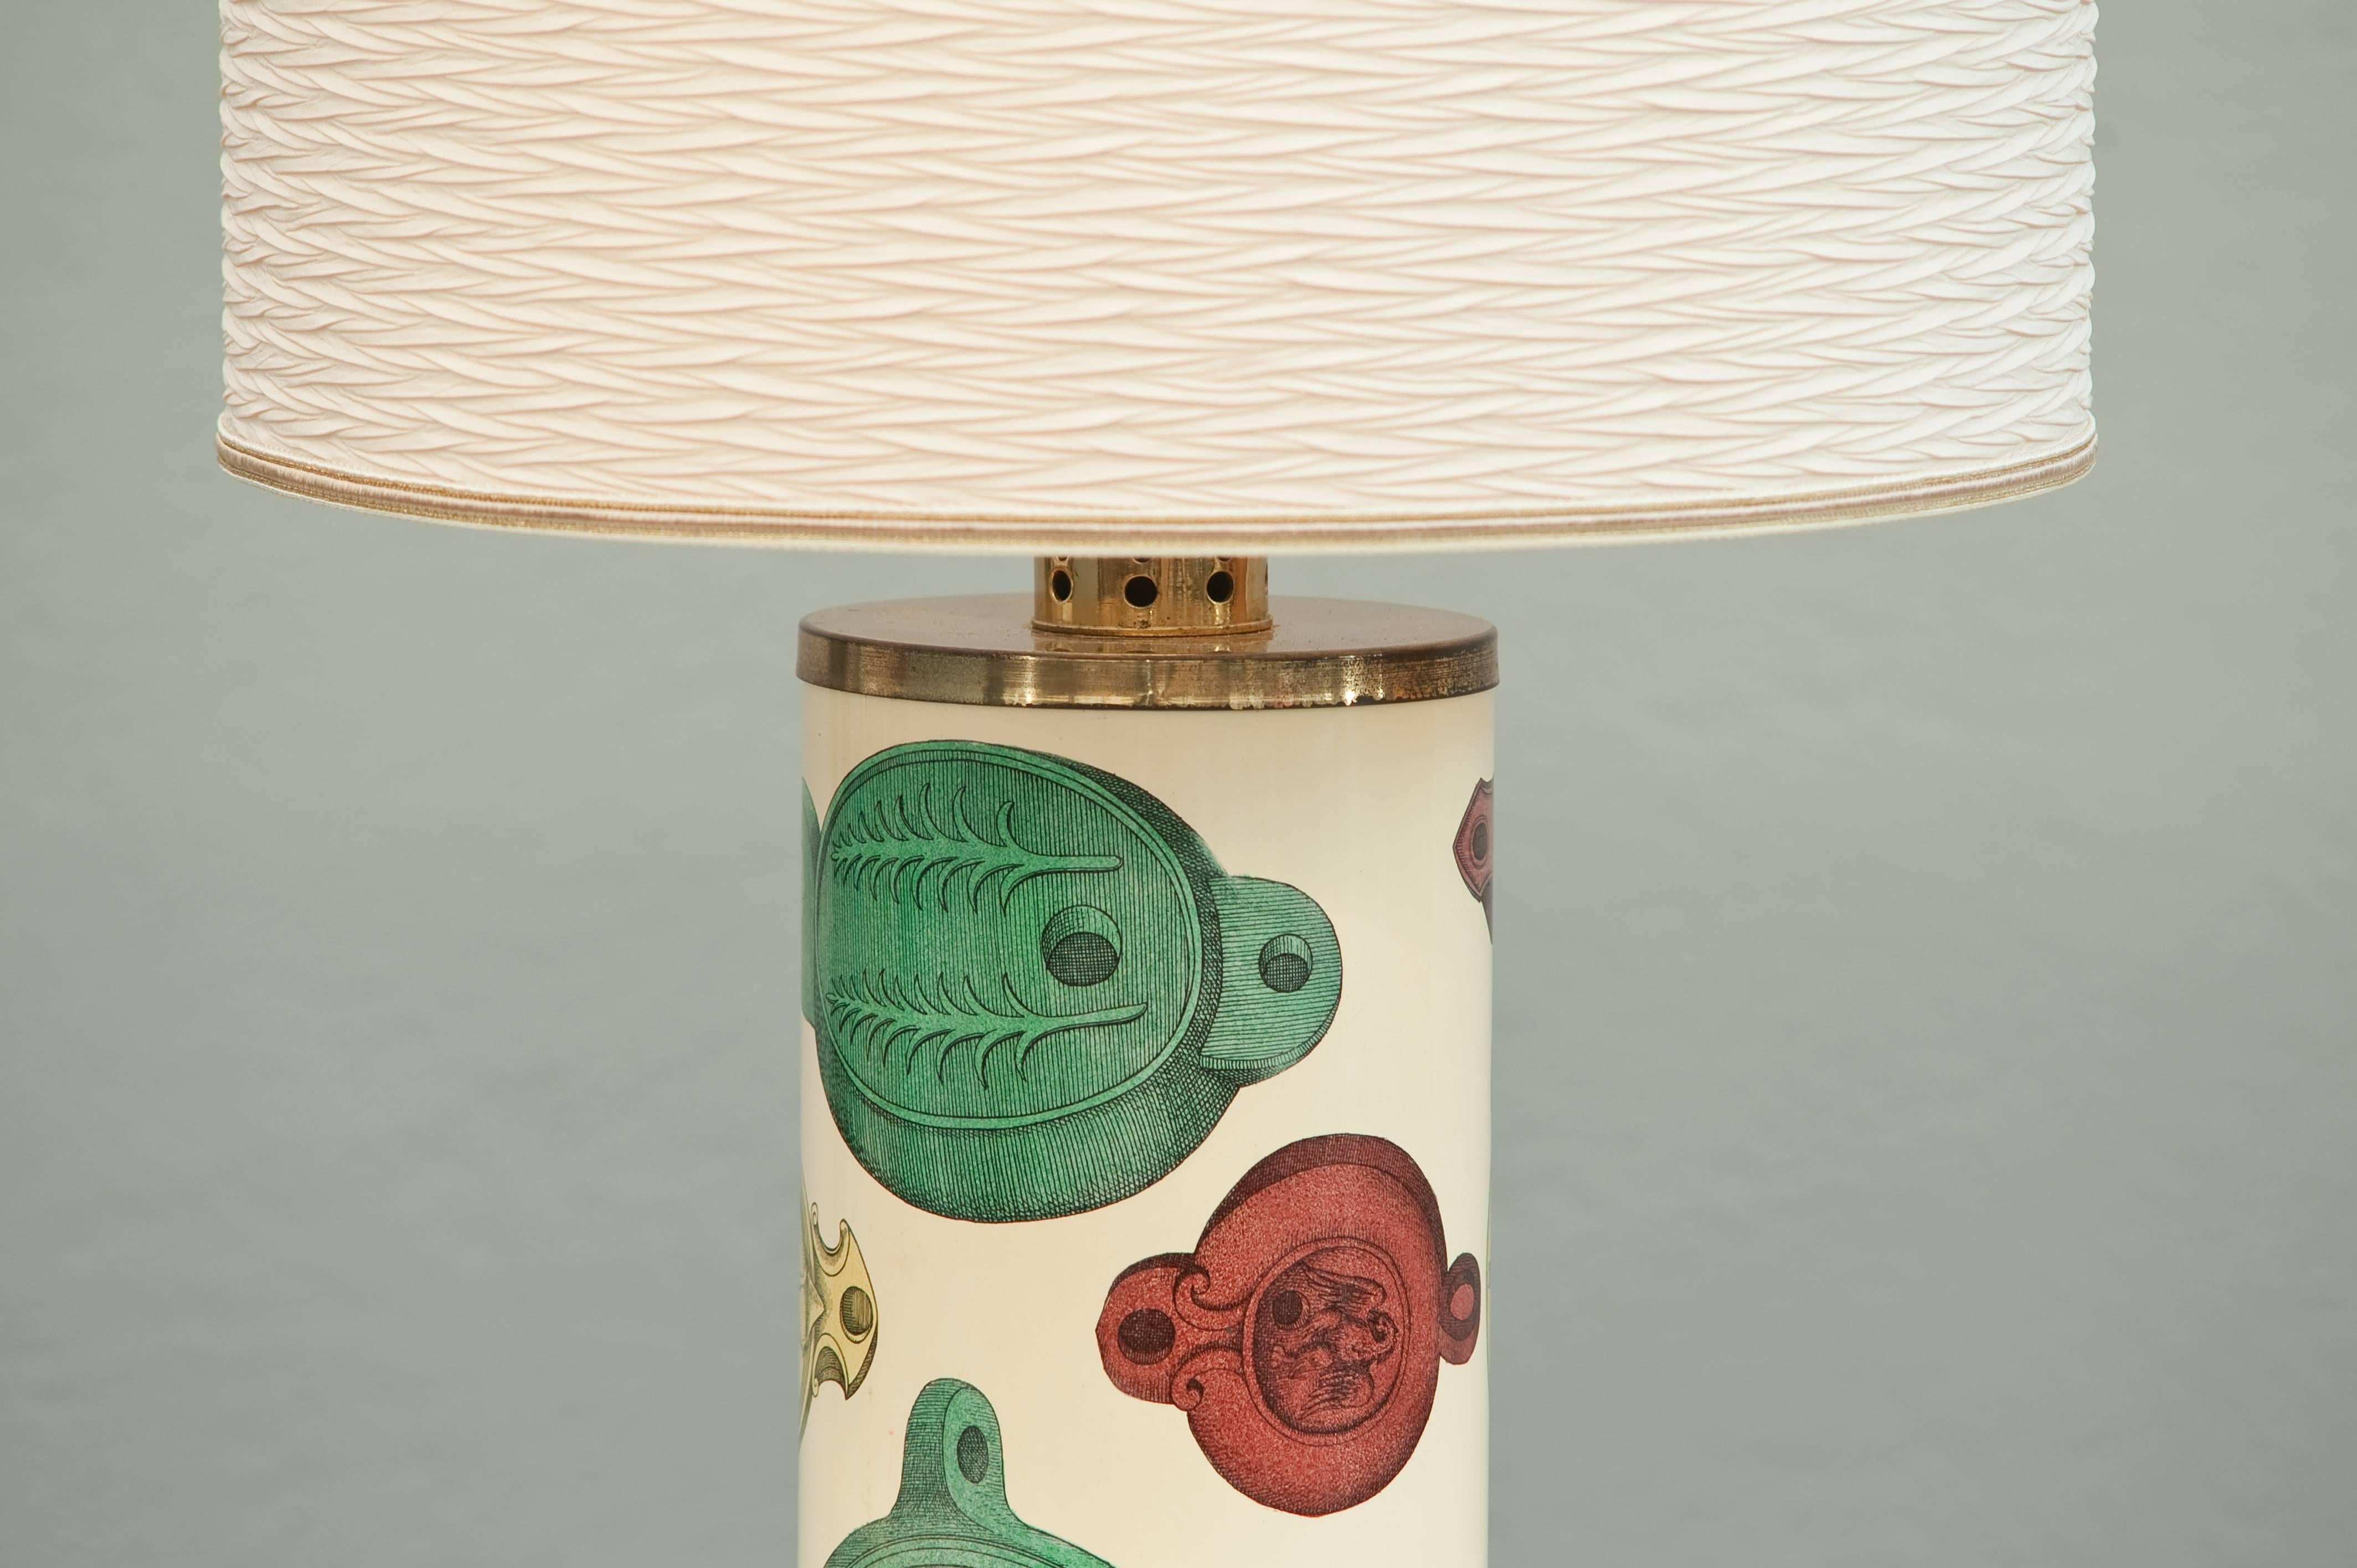 Enameled metal table lamp with printed lithographic antique lanterns with brass top and bottom.
Signed with early label.